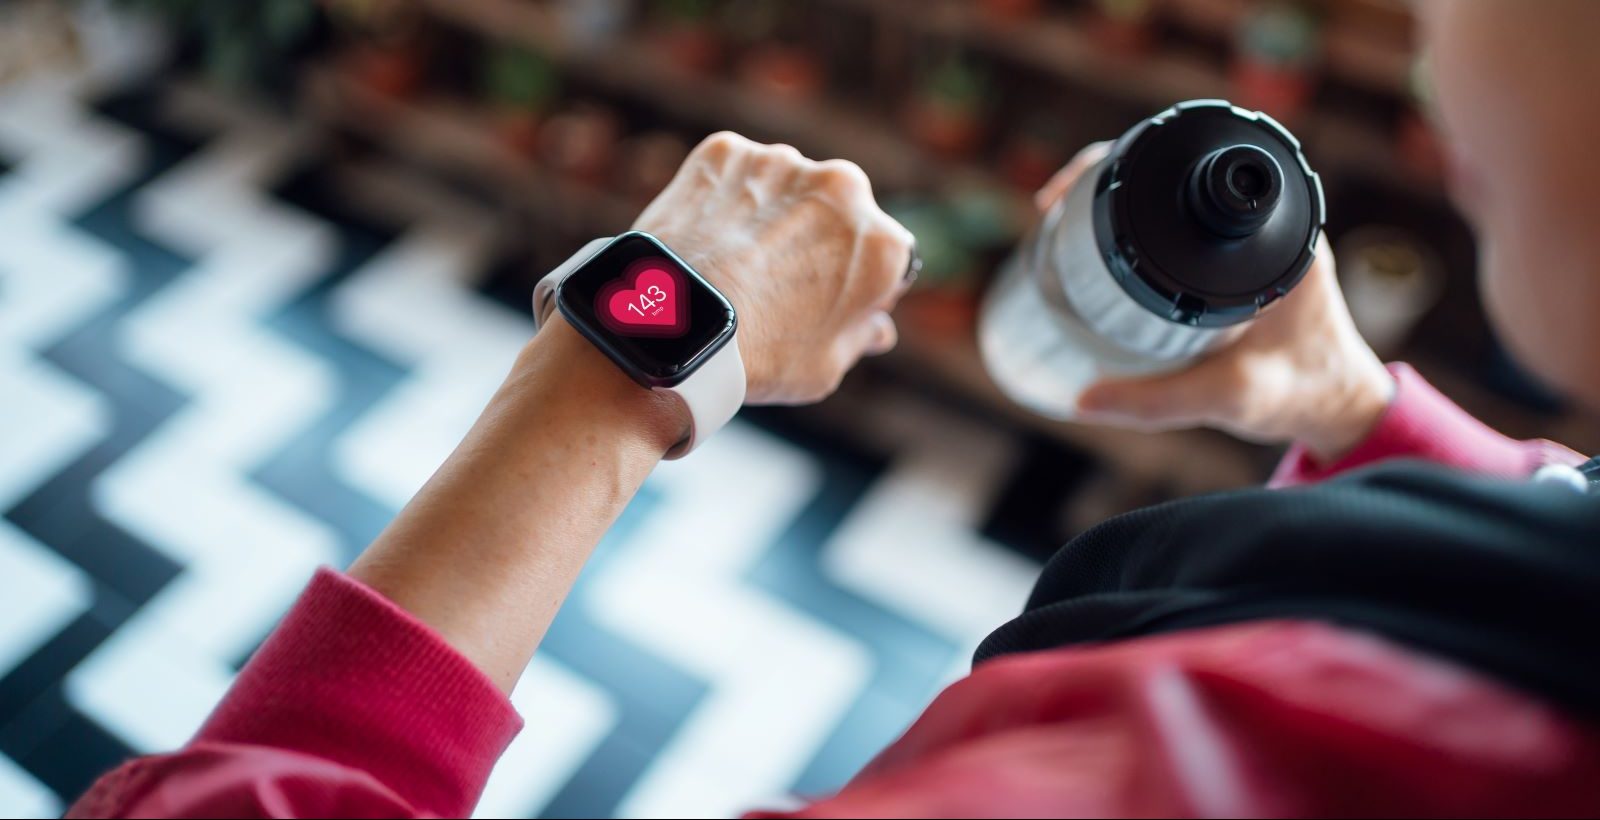 Wearable tech like smartwatches, Kardia and more can now detect the heart condition AFib. But what does your cardiologist think?